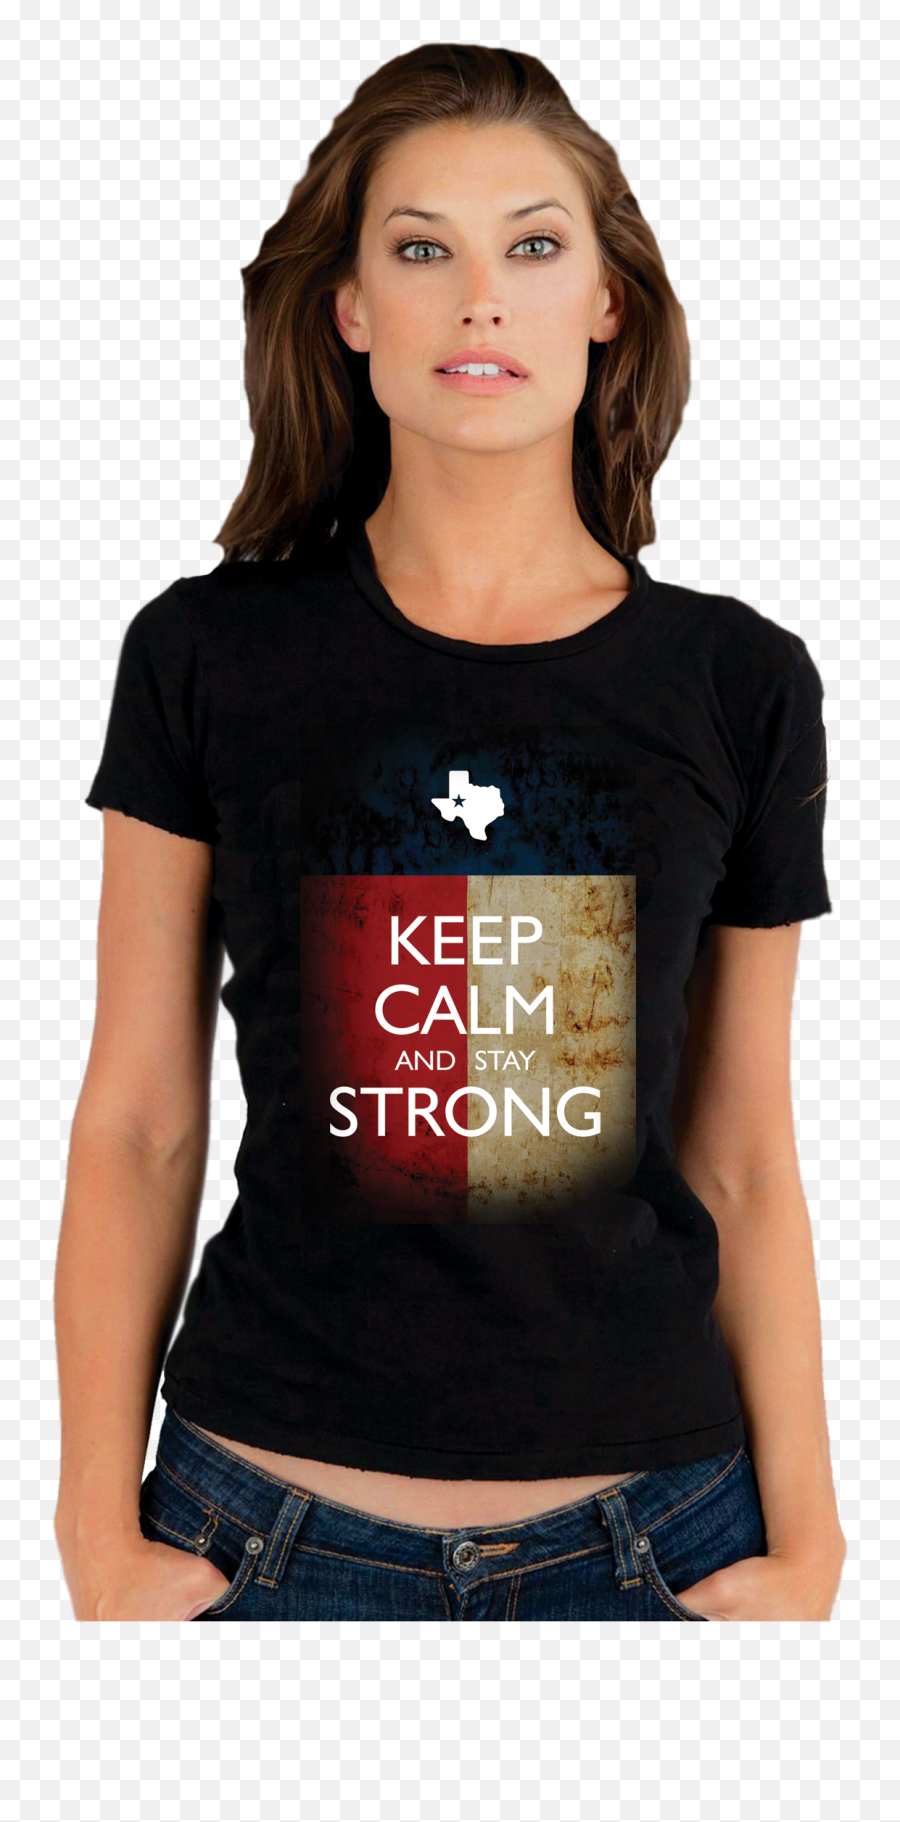 Keep Calm And Stay Strong Texas Emoji,Stay Strong Face Text Emoticon